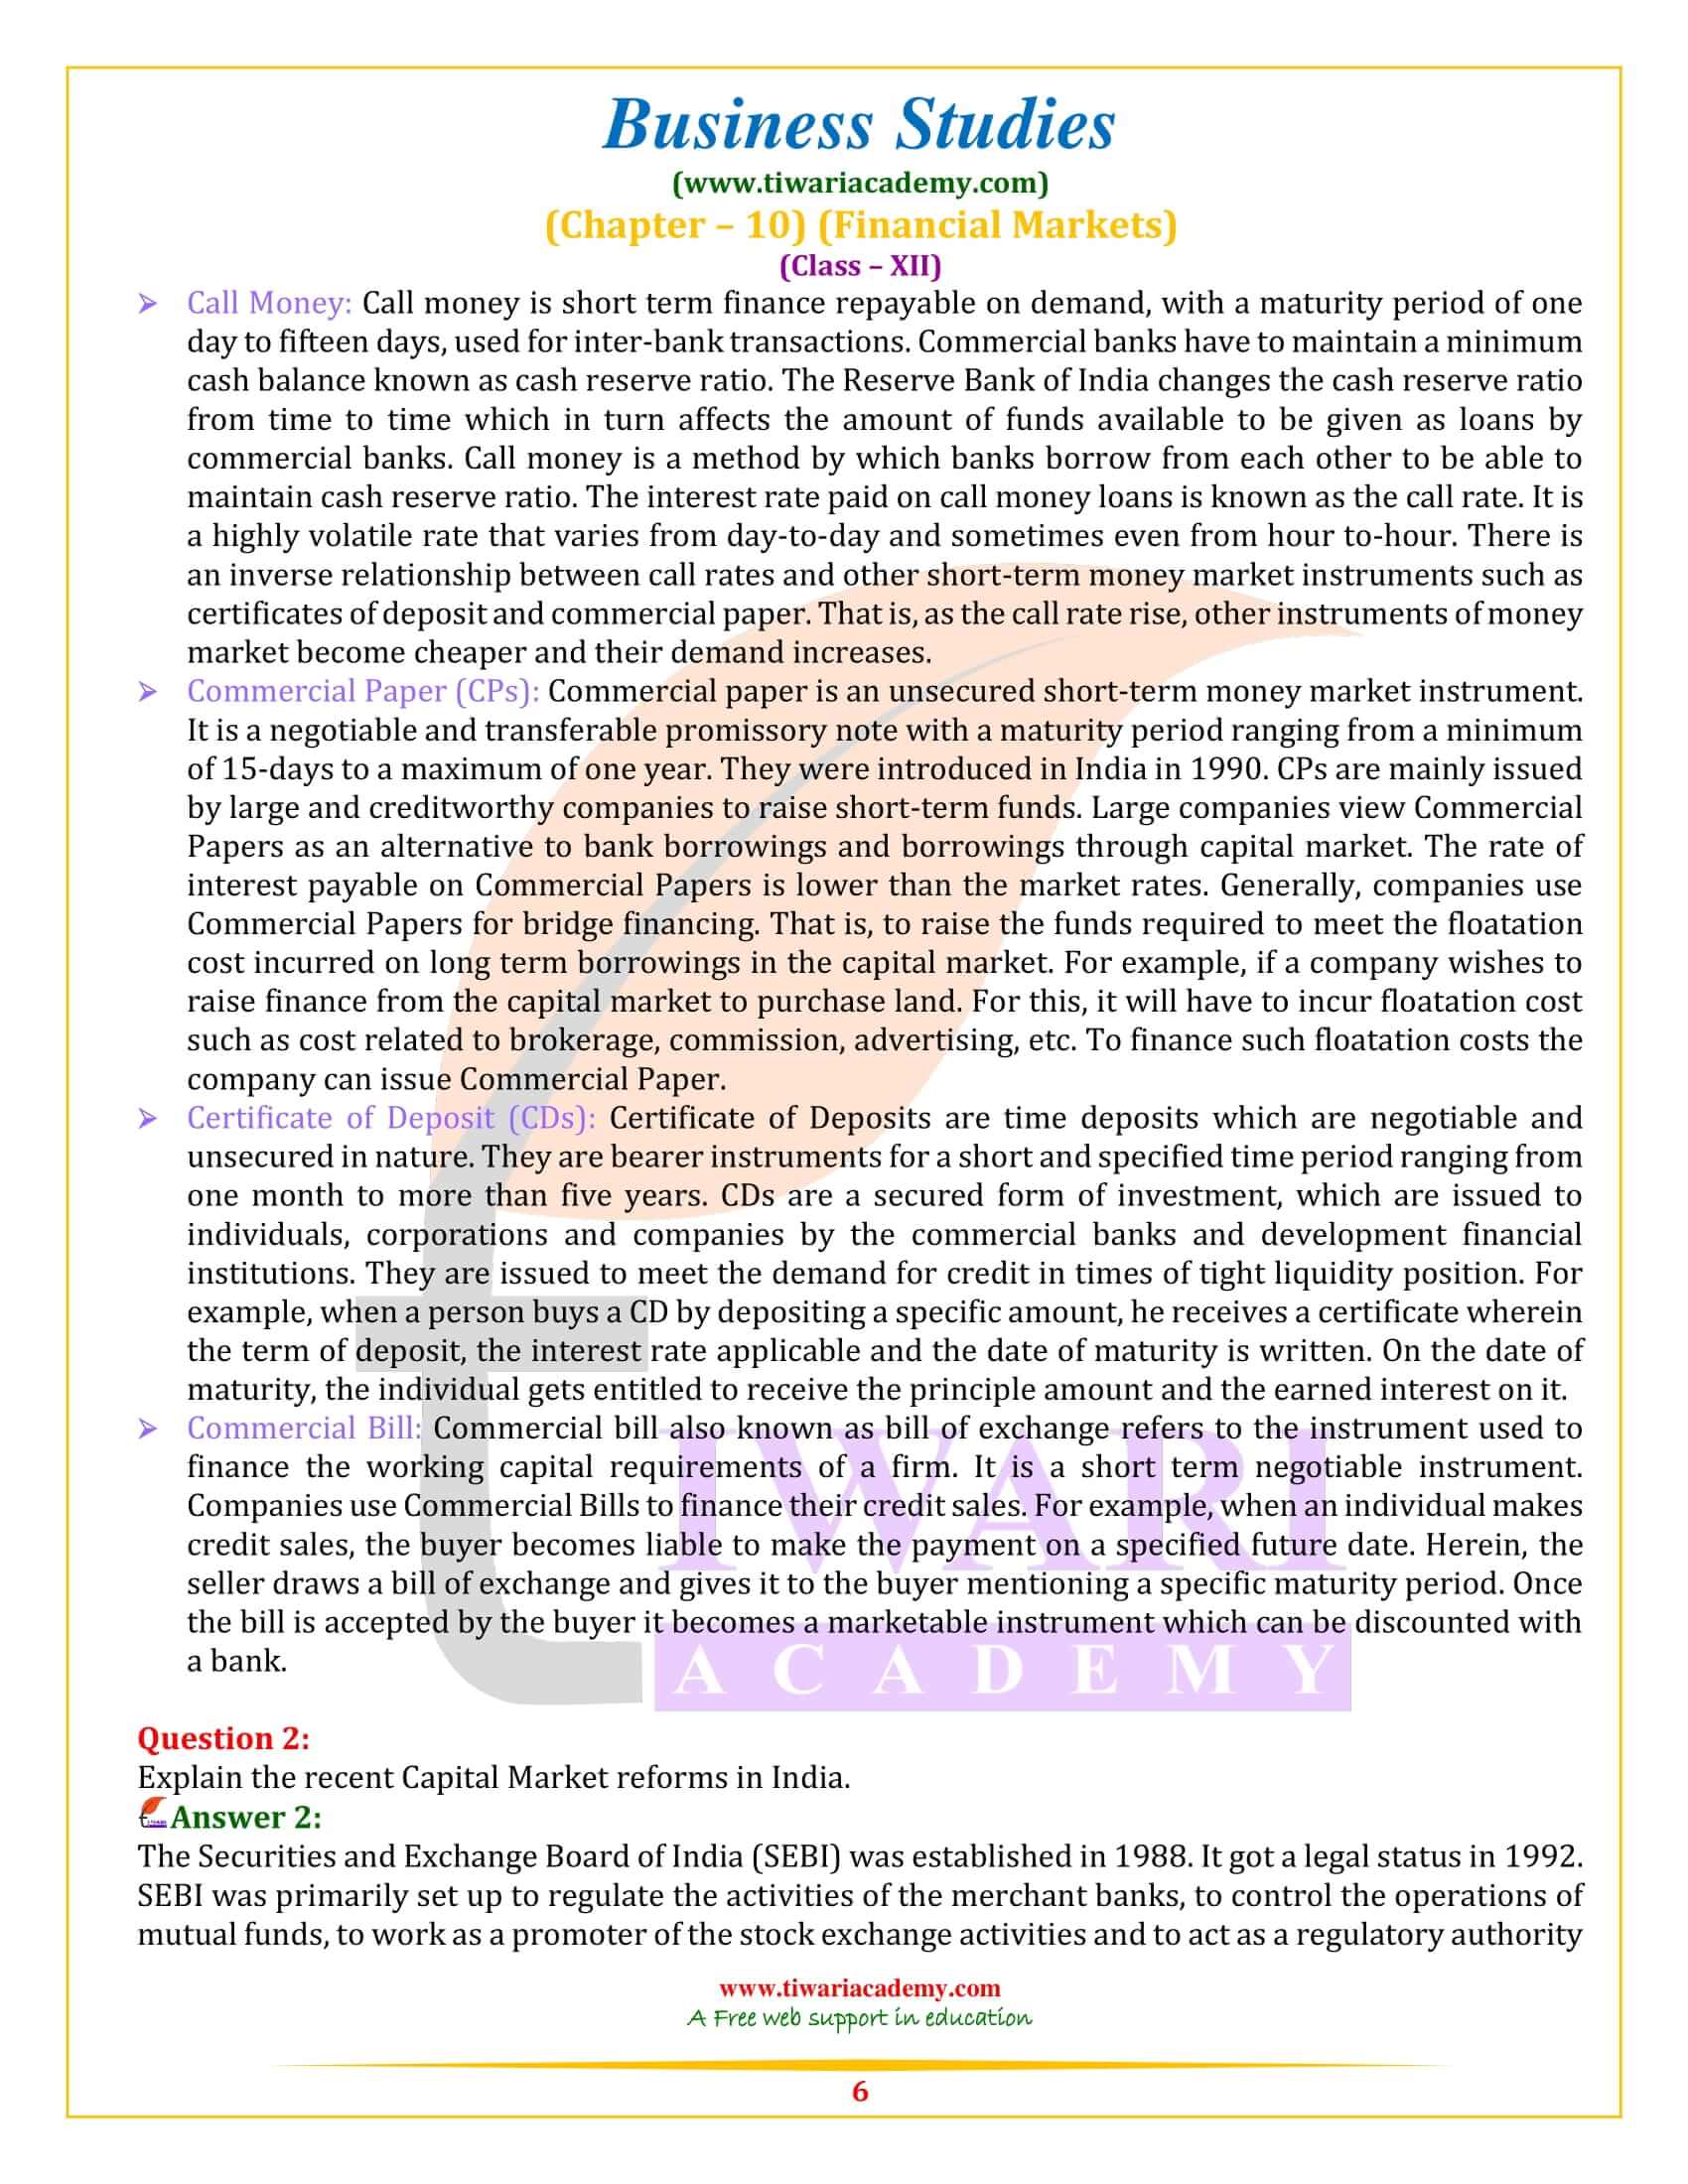 NCERT Solutions for Class 12 Business Studies Chapter 10 short answer type question